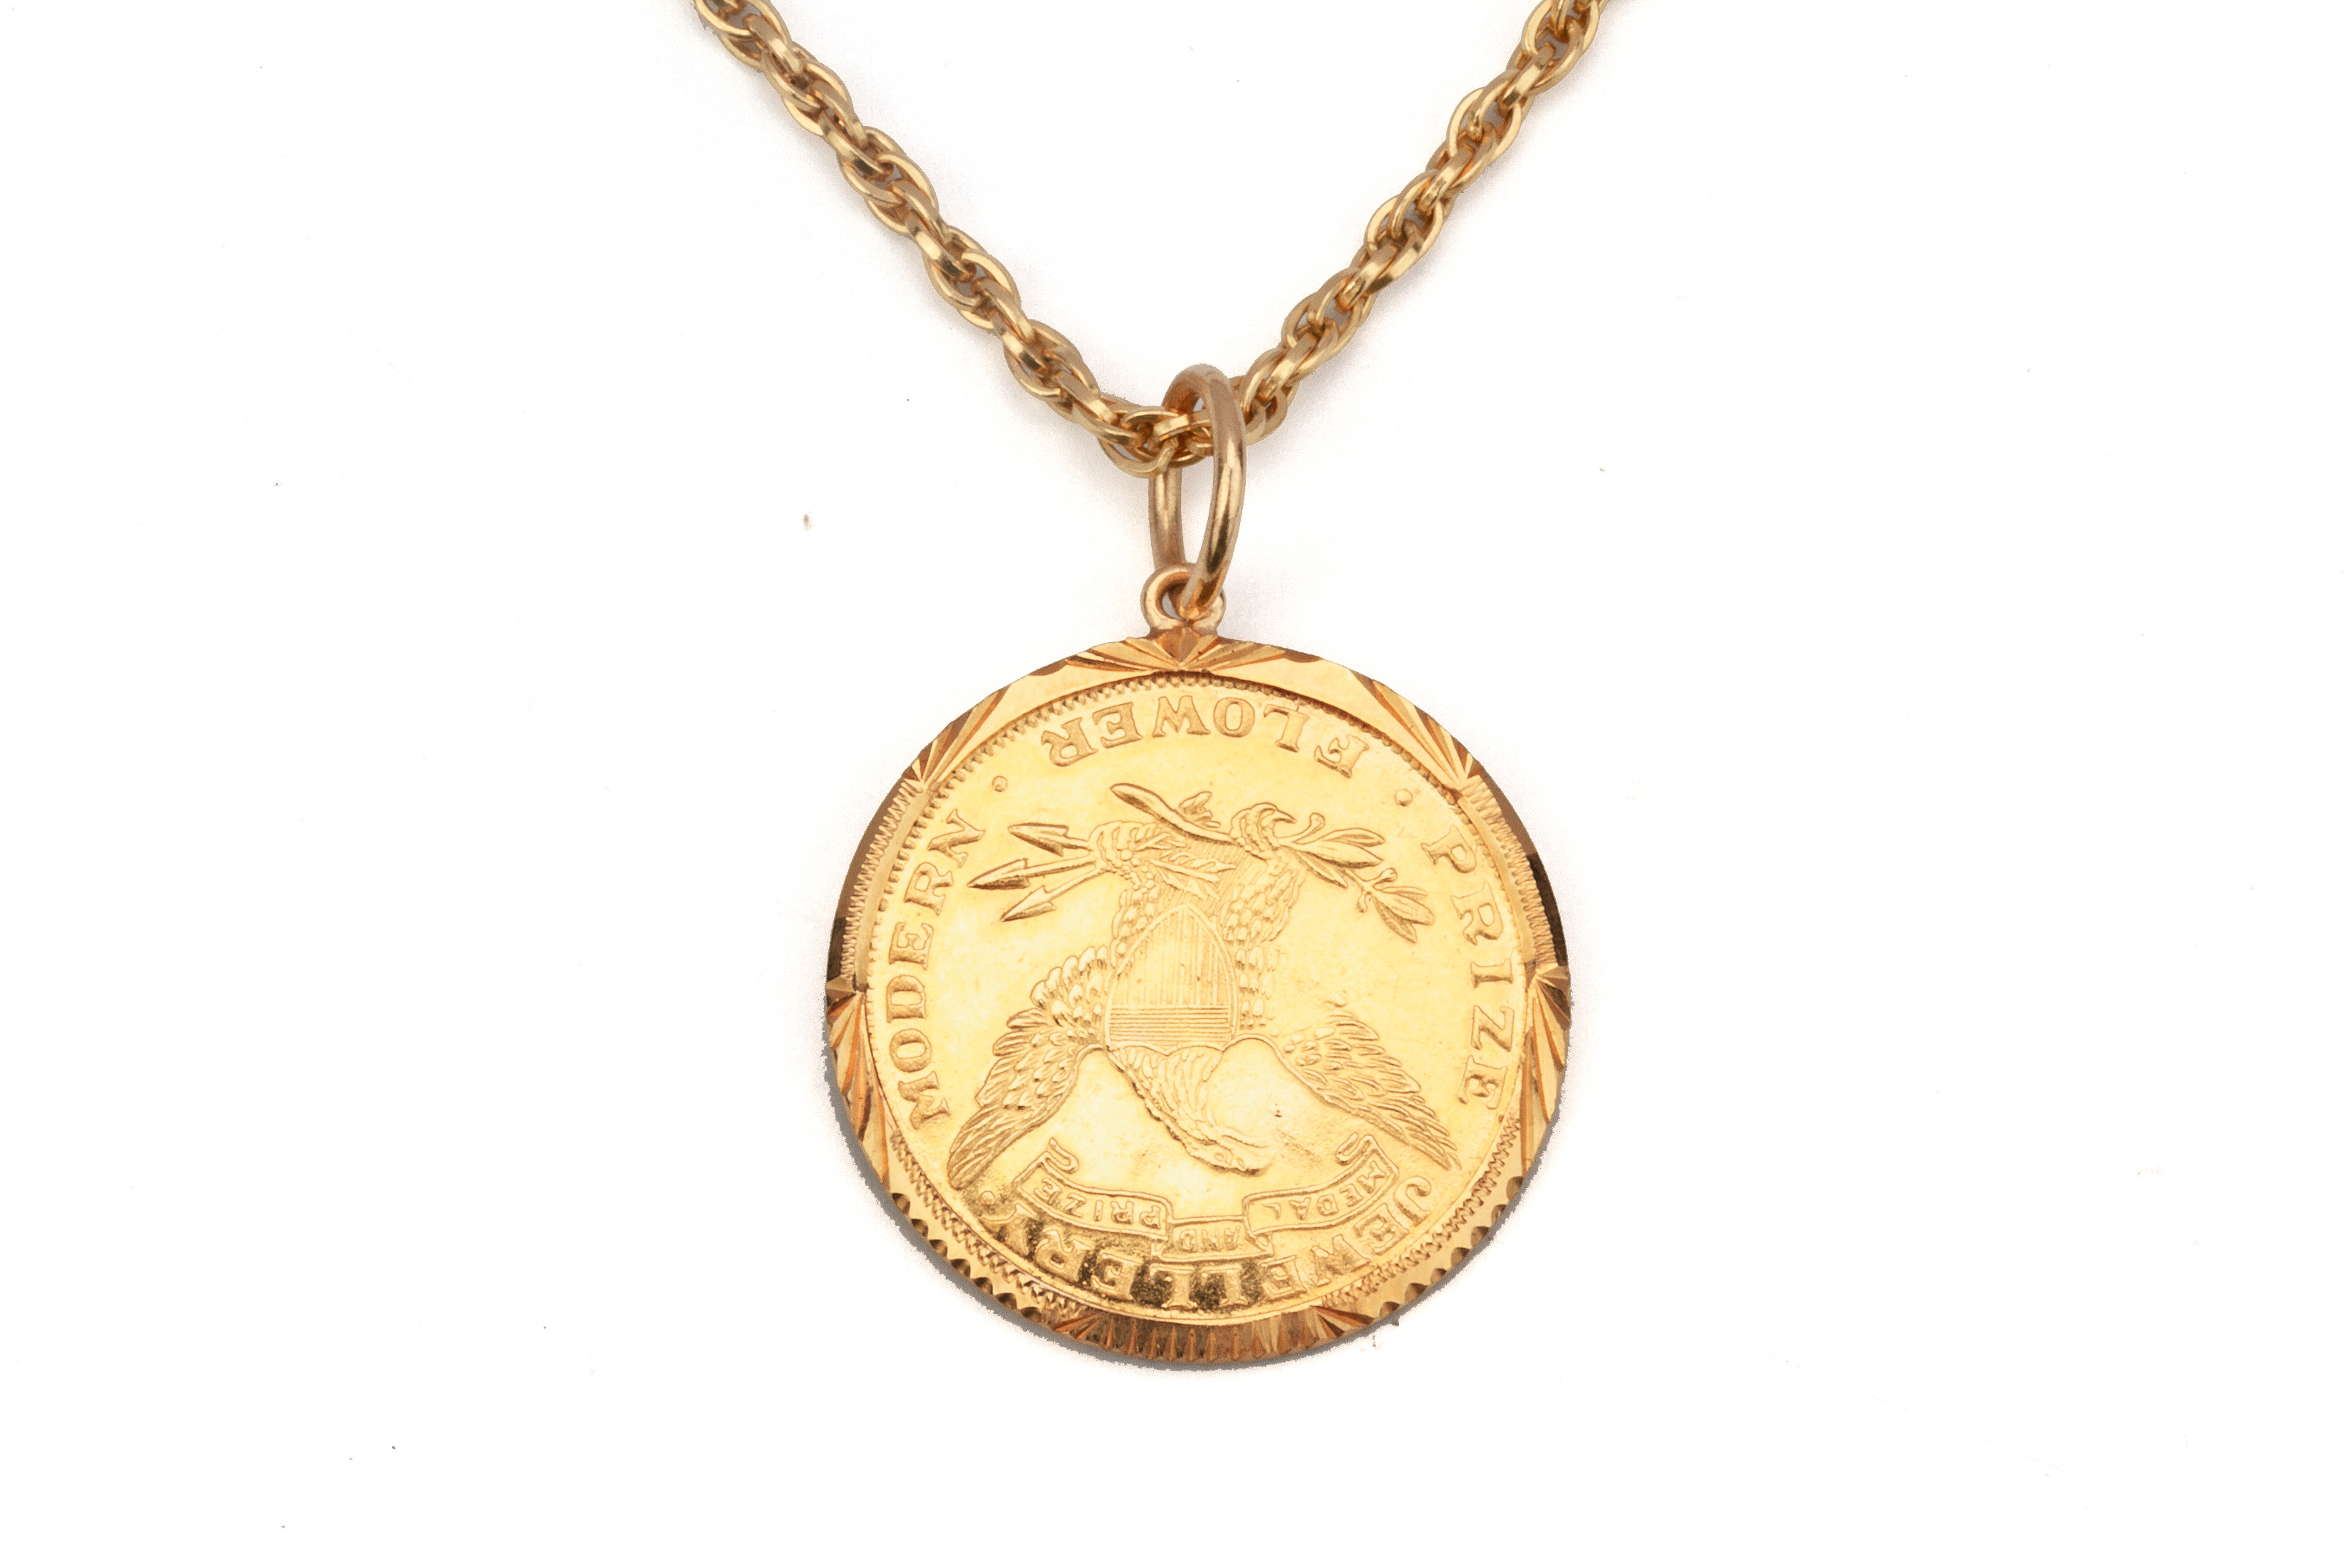 A GOLD MEDALLION PENDANT ON CHAIN - Image 2 of 2